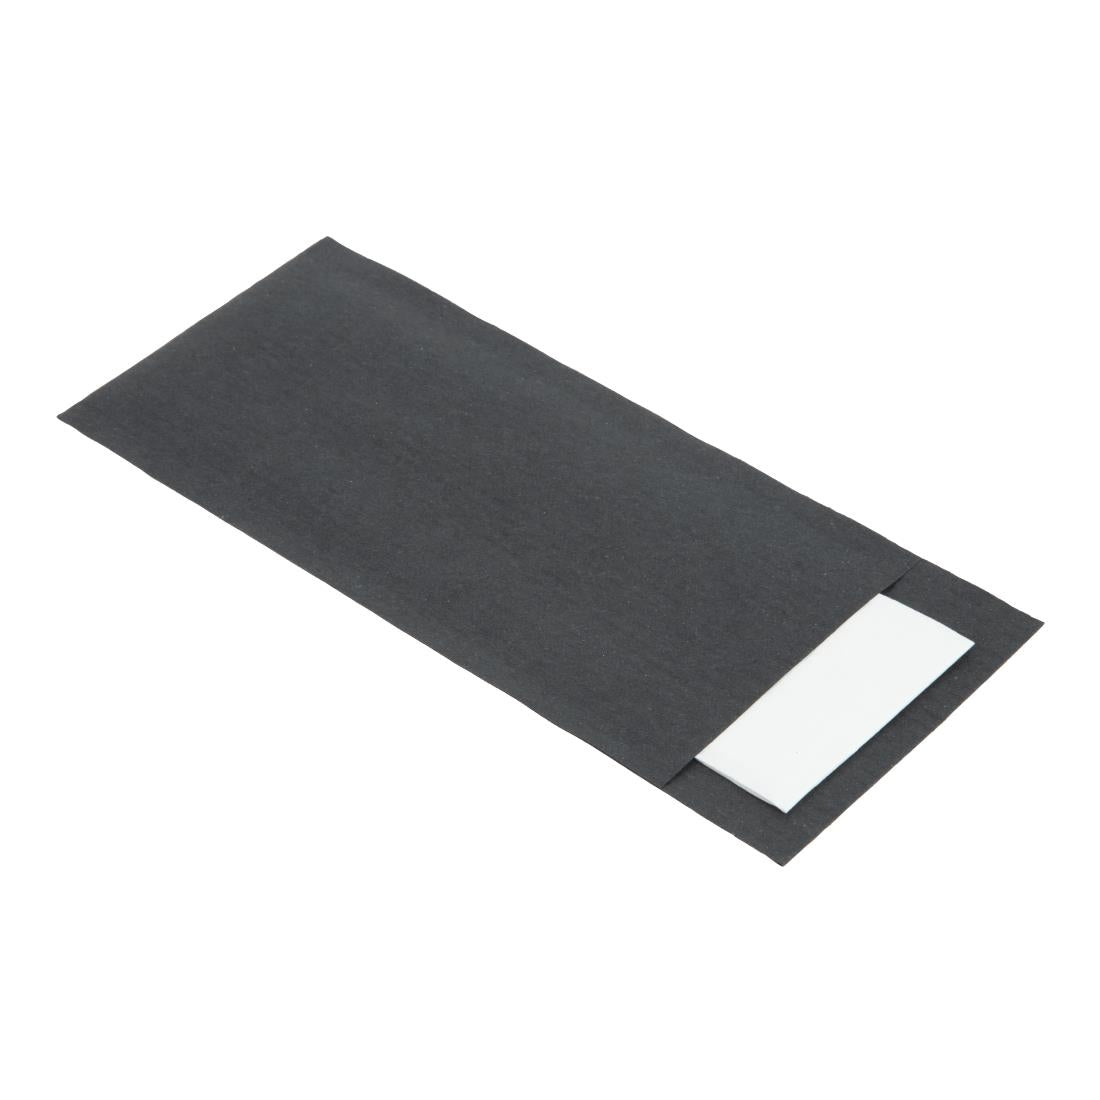 CK236 Europochette Black Cutlery Pouch with White Napkin (Pack of 500) JD Catering Equipment Solutions Ltd